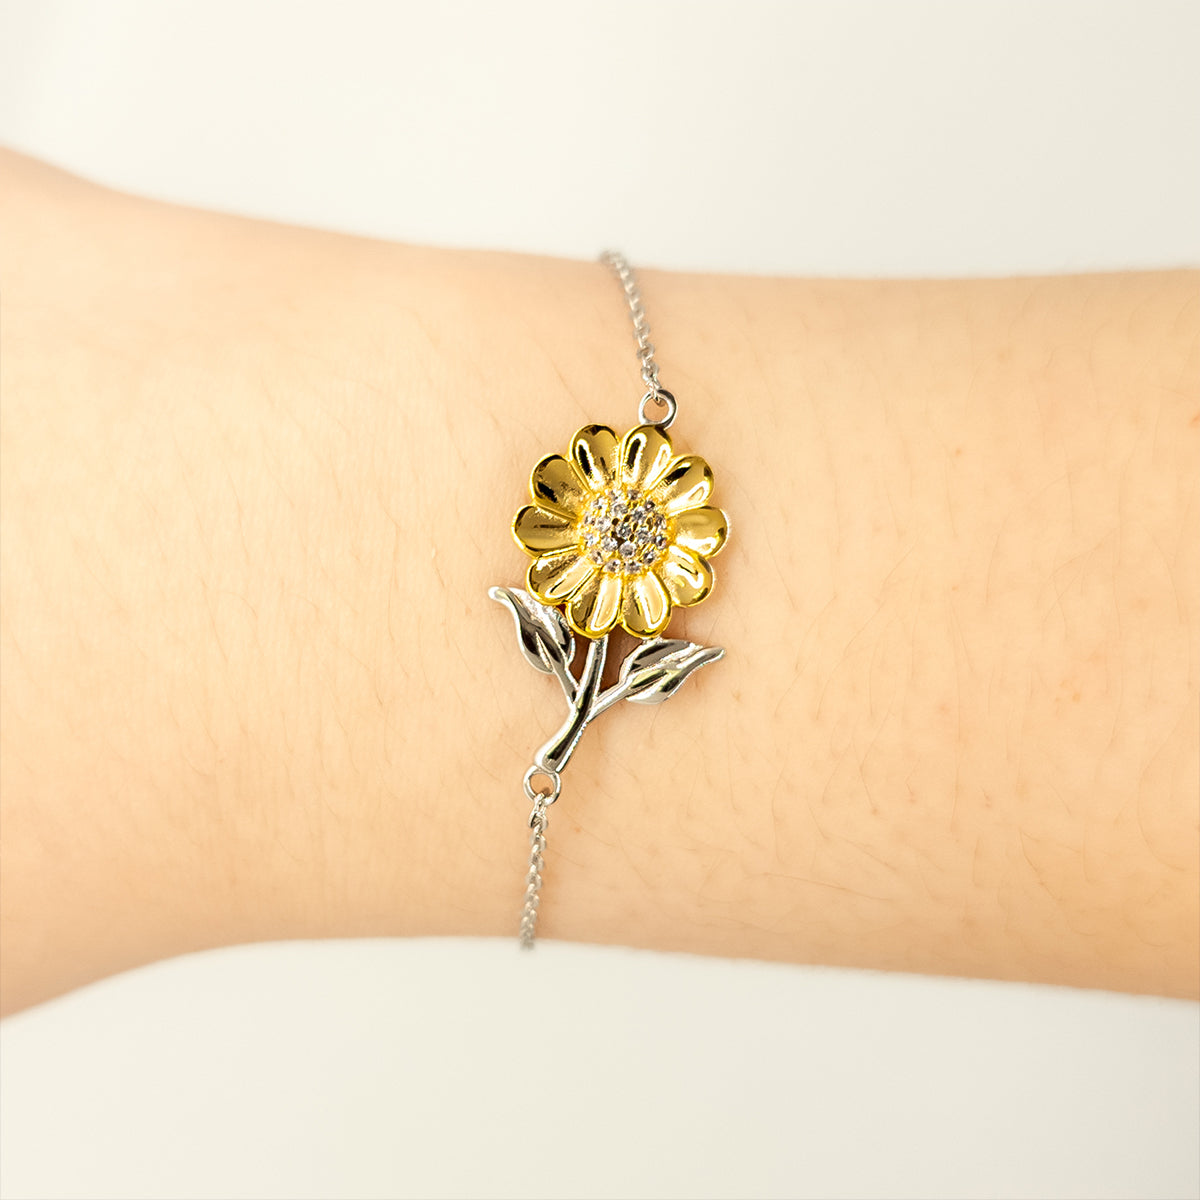 Sunflower Bracelet for Girlfriend - Engraved Reminder of Our Special Love, Confidence, and Hope for Birthday, Holidays, or Any Occasion